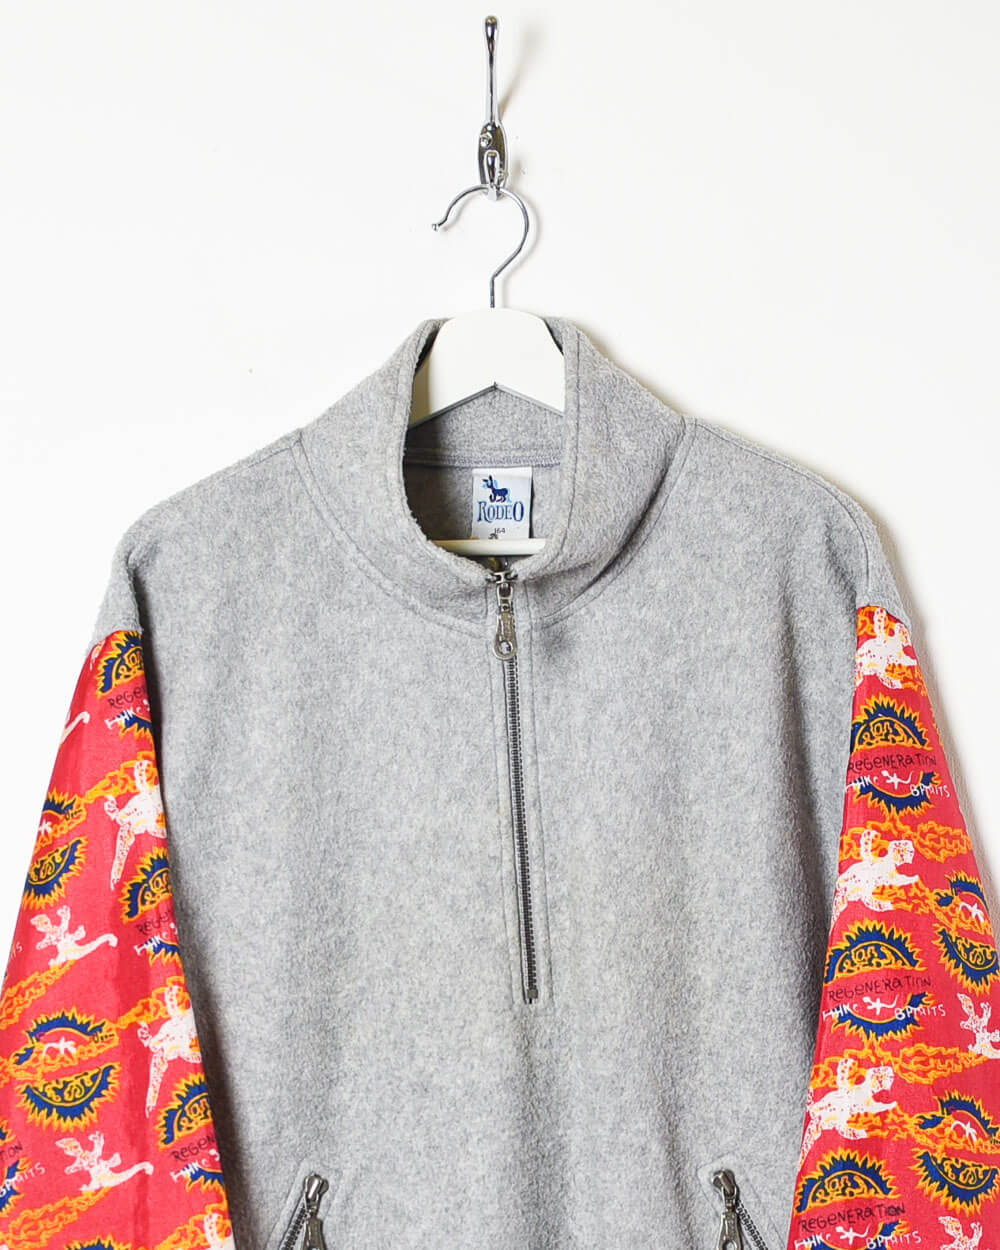 Stone Rodeo 1/4 Zip Patterned Fleece - Small